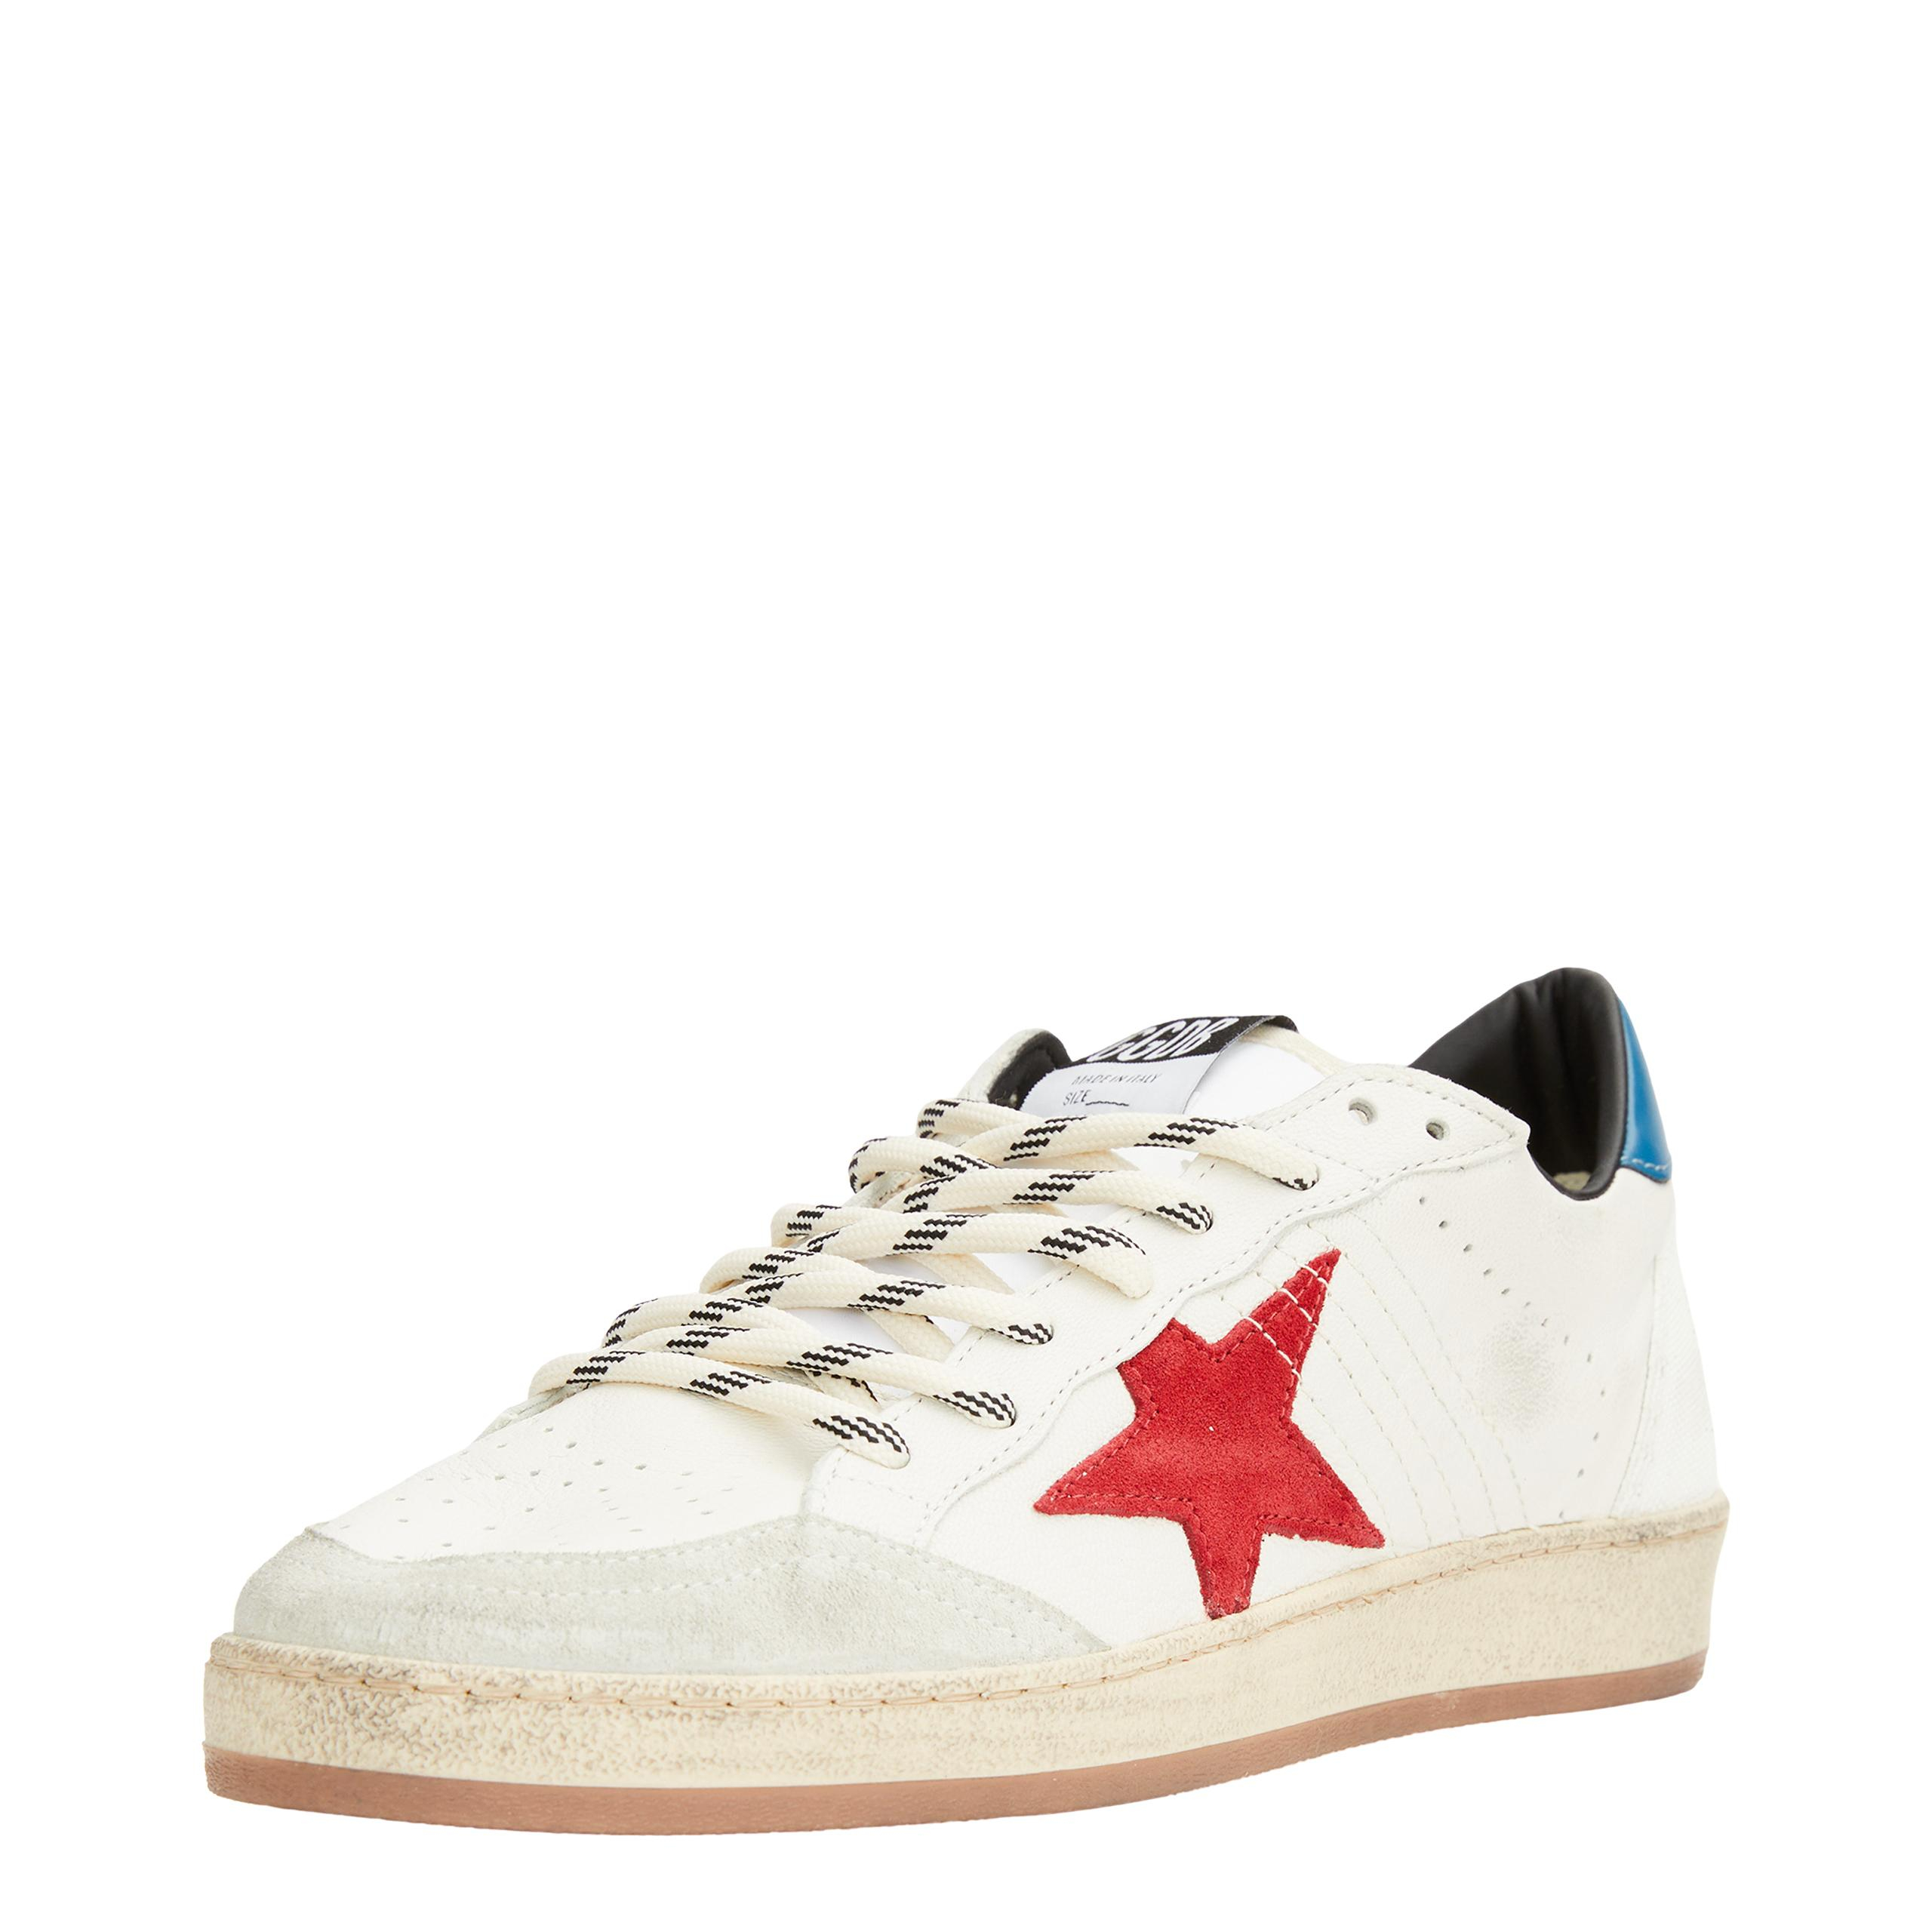 None Golden Goose Deluxe Brand GMF00117/F005403/11716, размер 39;40;41;42;43;44;45;46 GMF00117/F005403/11716 - фото 2